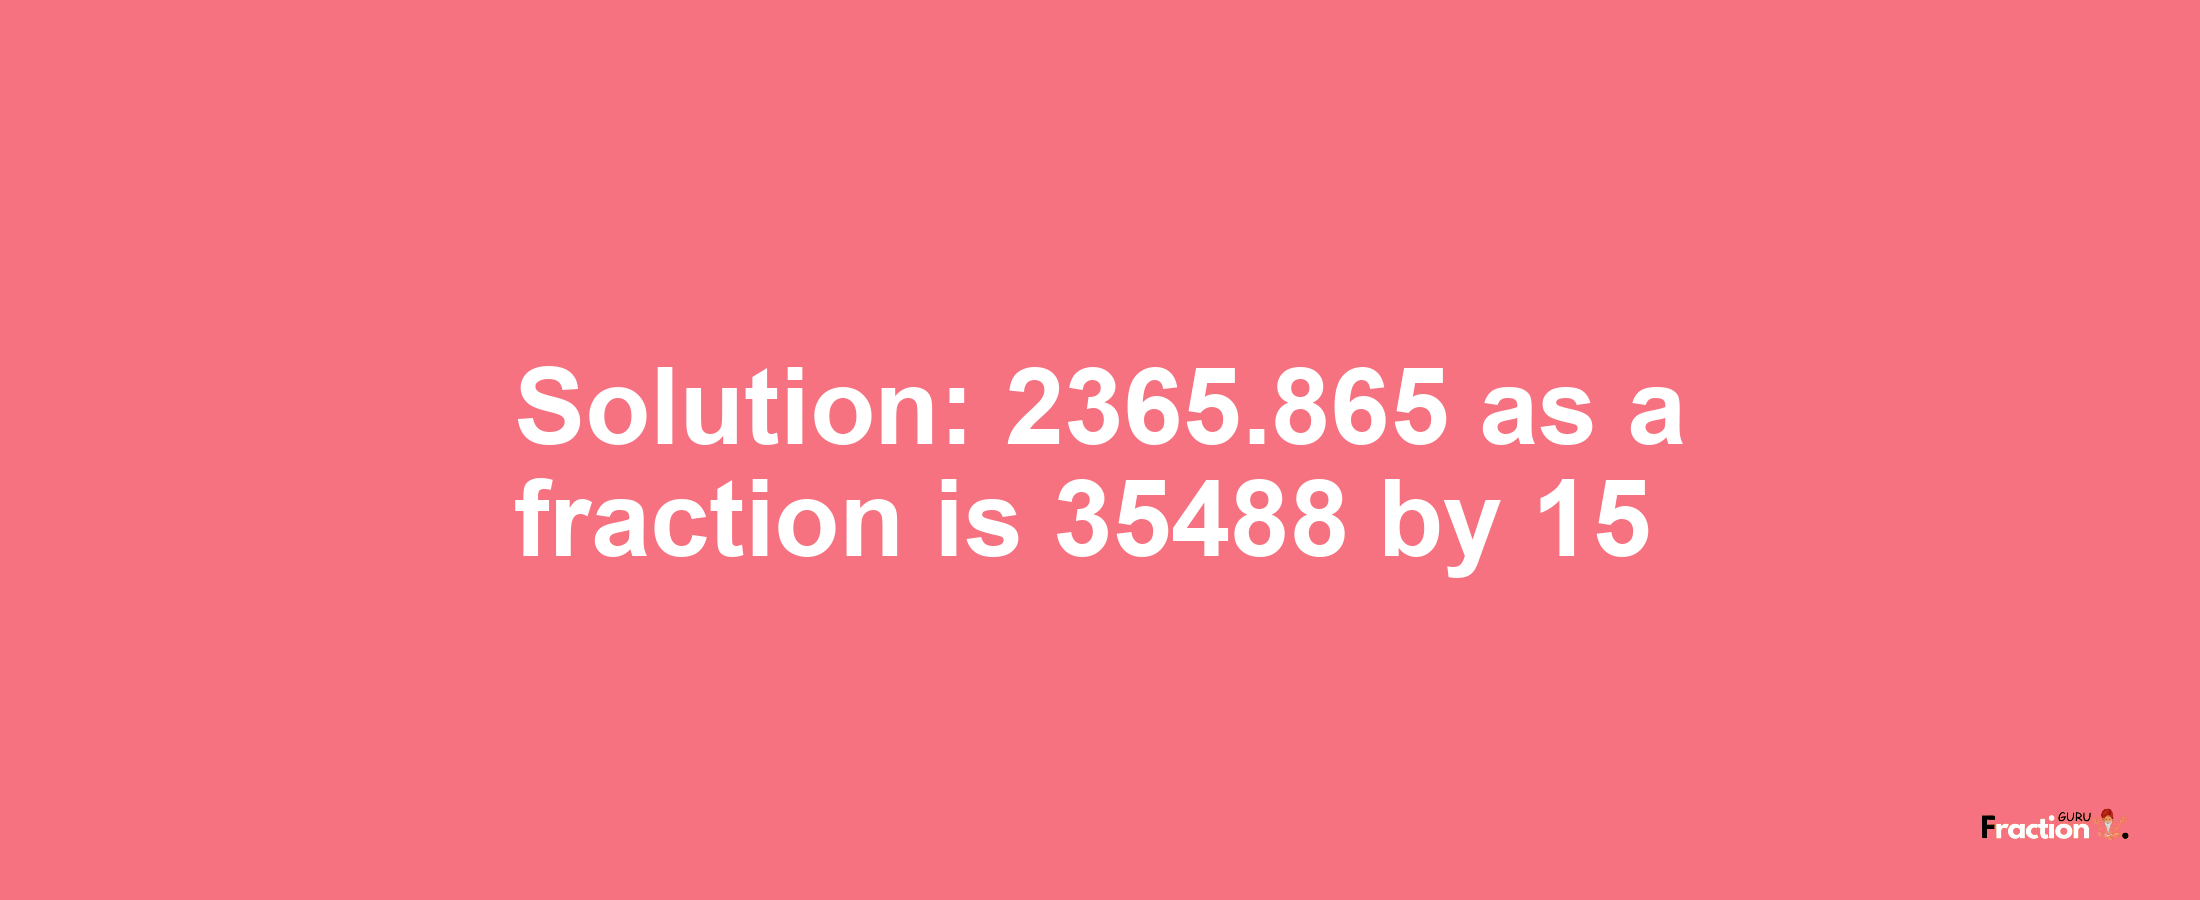 Solution:2365.865 as a fraction is 35488/15